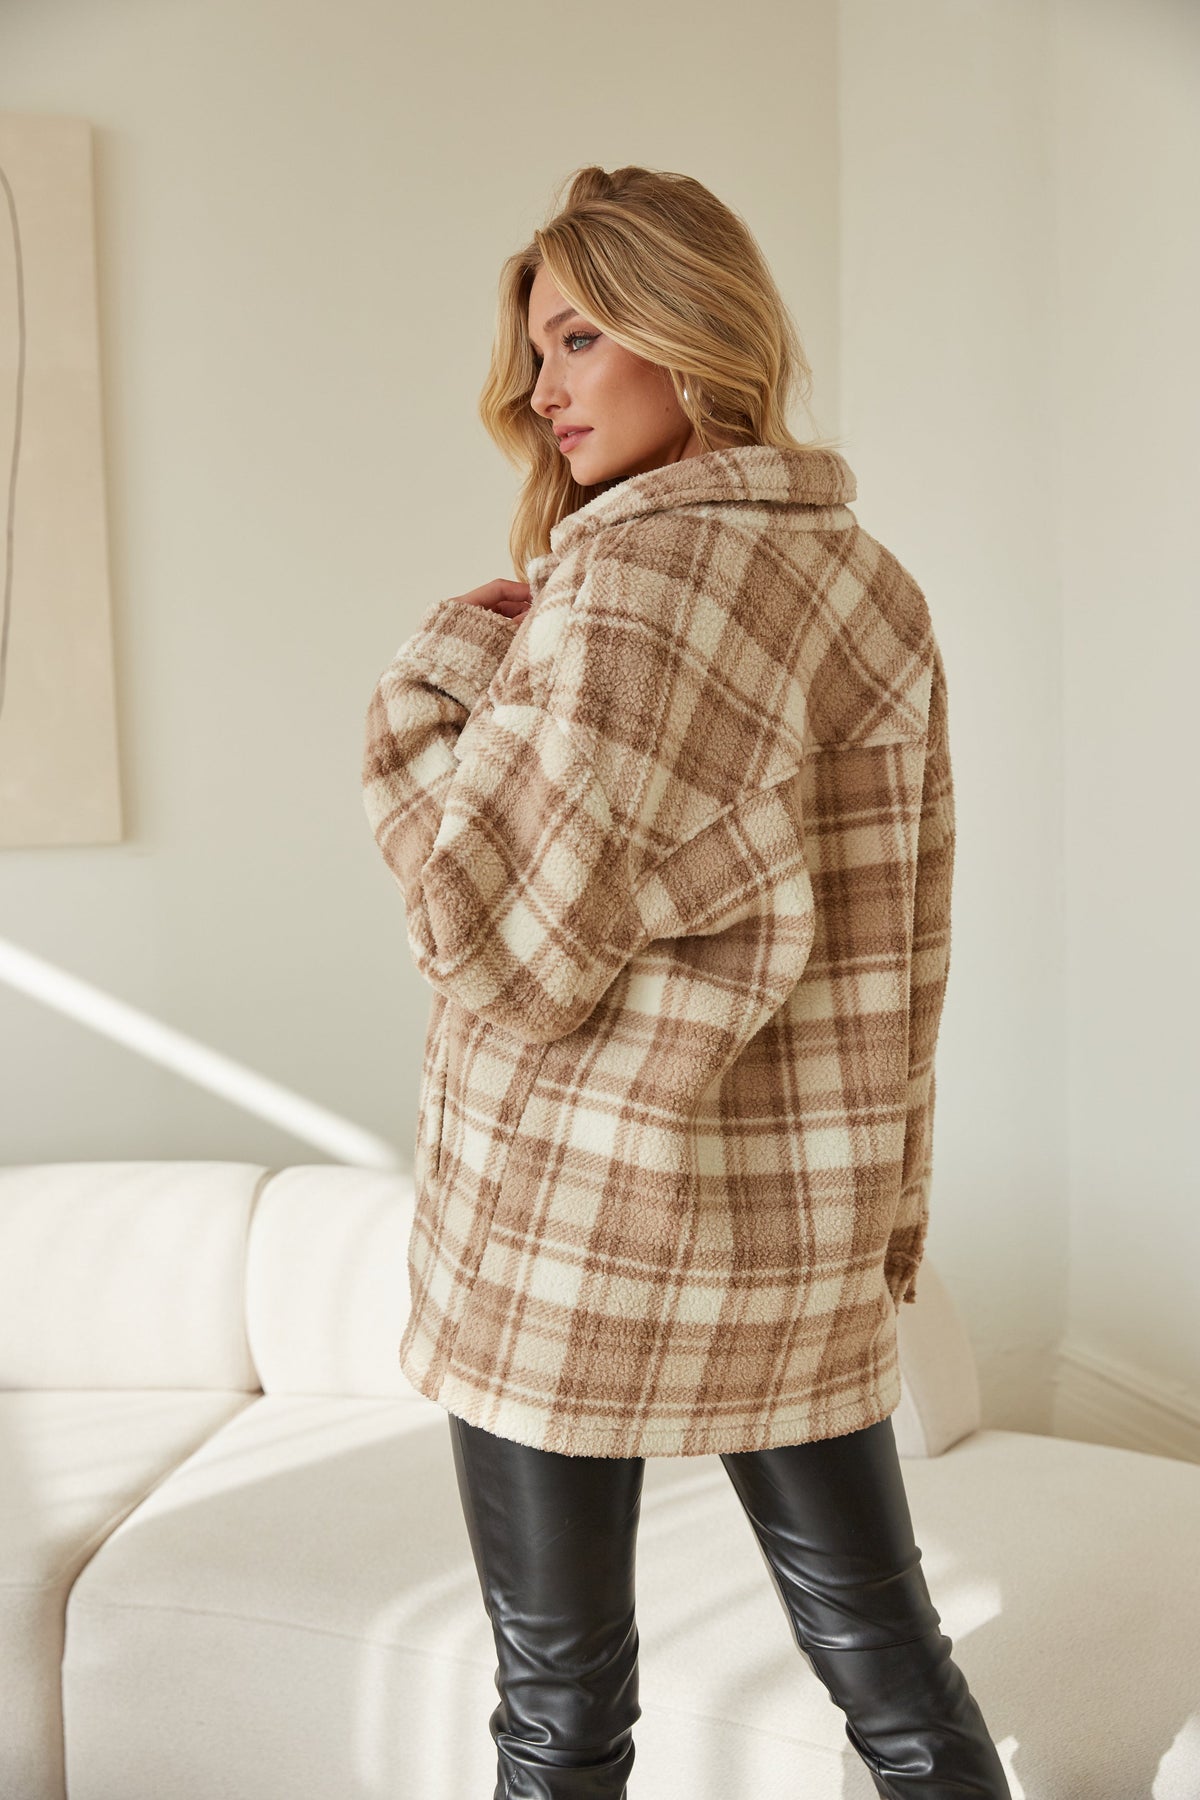 neutral plaid shacket - ivory and beige sherpa jacket - cozy collared outerwear - fuzzy jackets for fall - trendy winter wear - neutral fall jacket